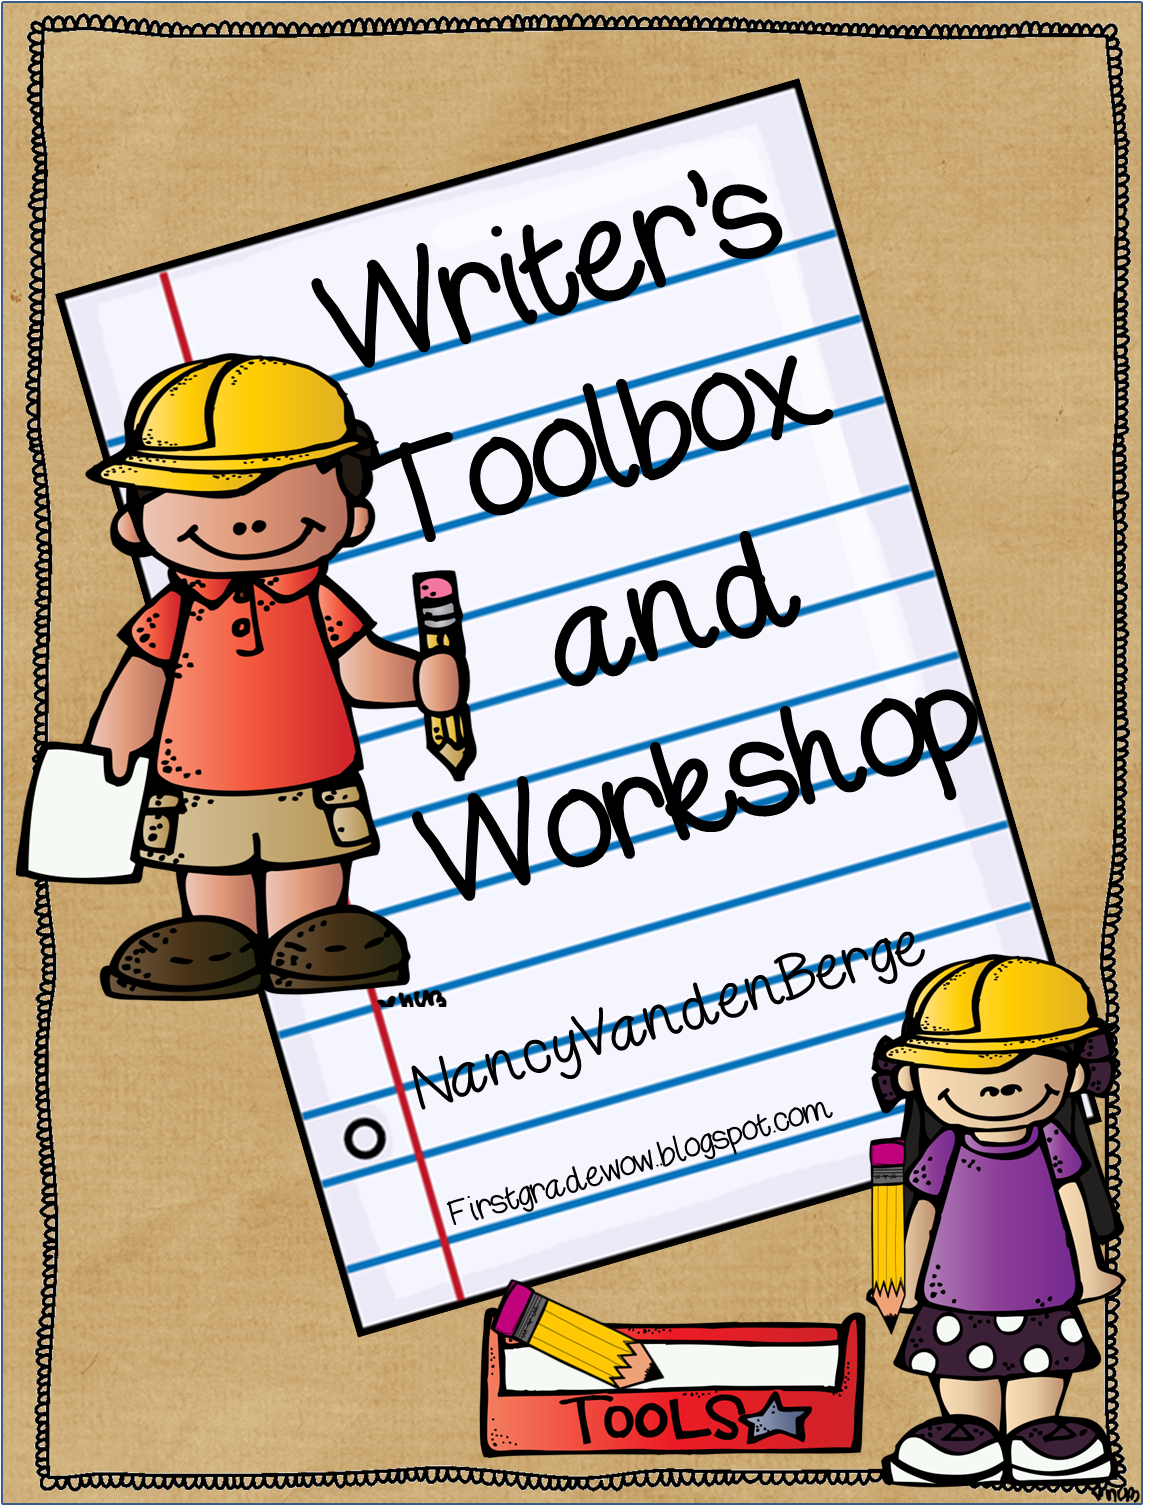 author clipart writers workshop